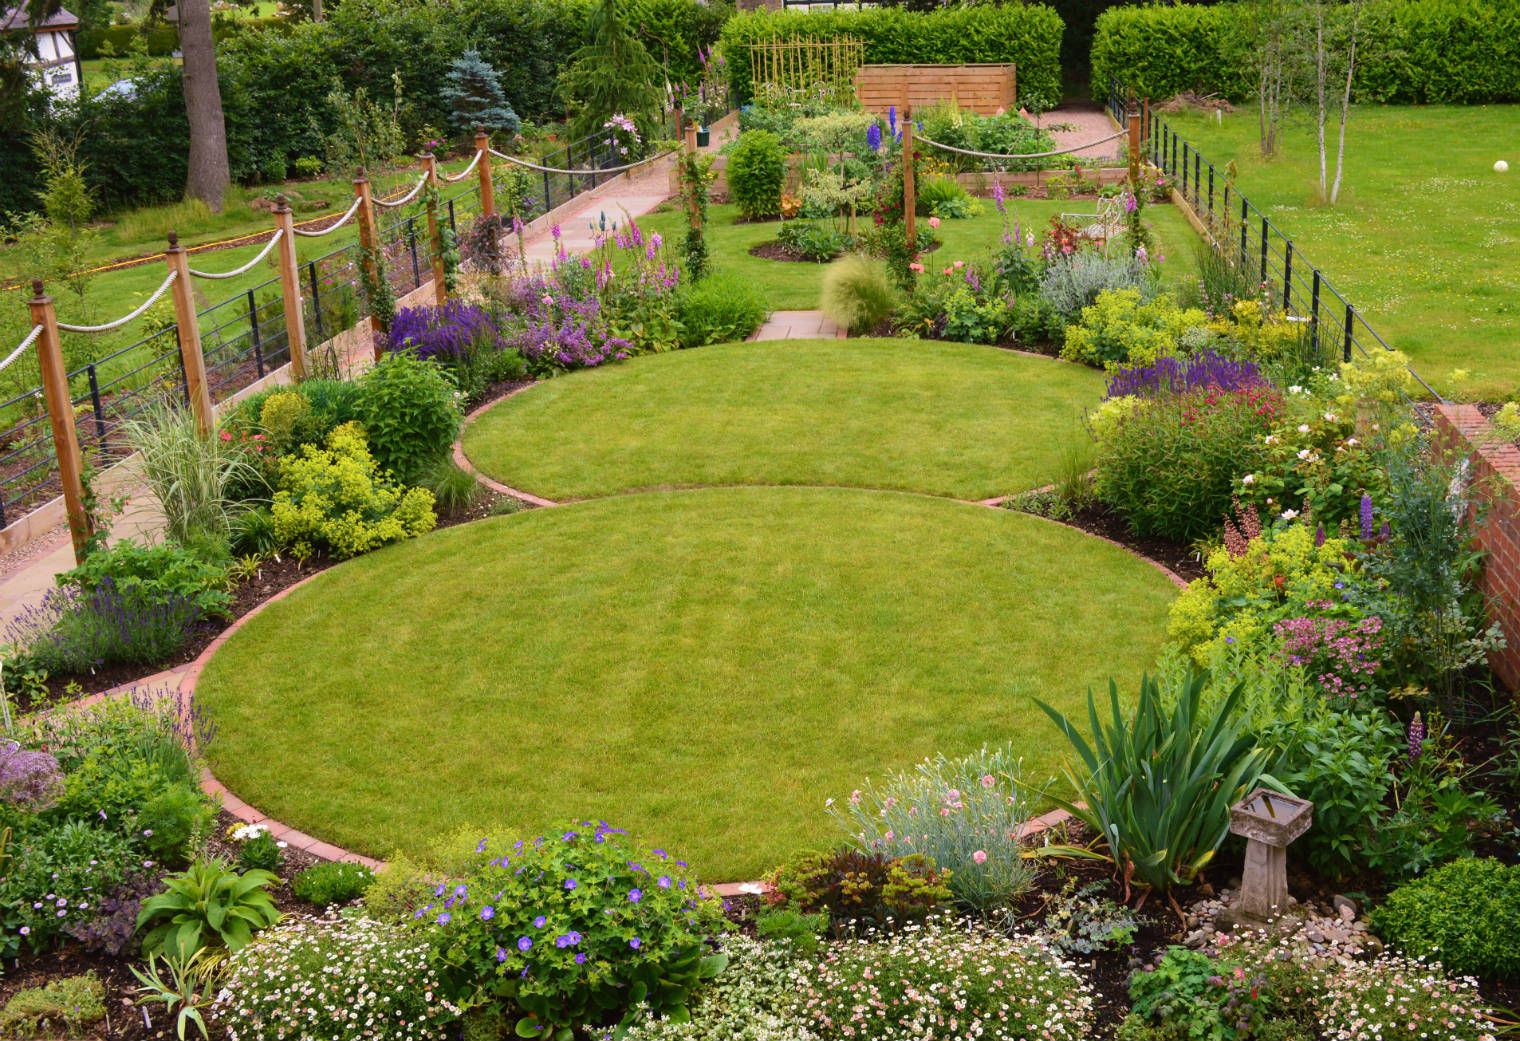 Circular lawns and traditional planting scheme Unique Landscapes حديقة circular lawns,traditional planting,timber posts,rope,lawn,country garden,traditional garden